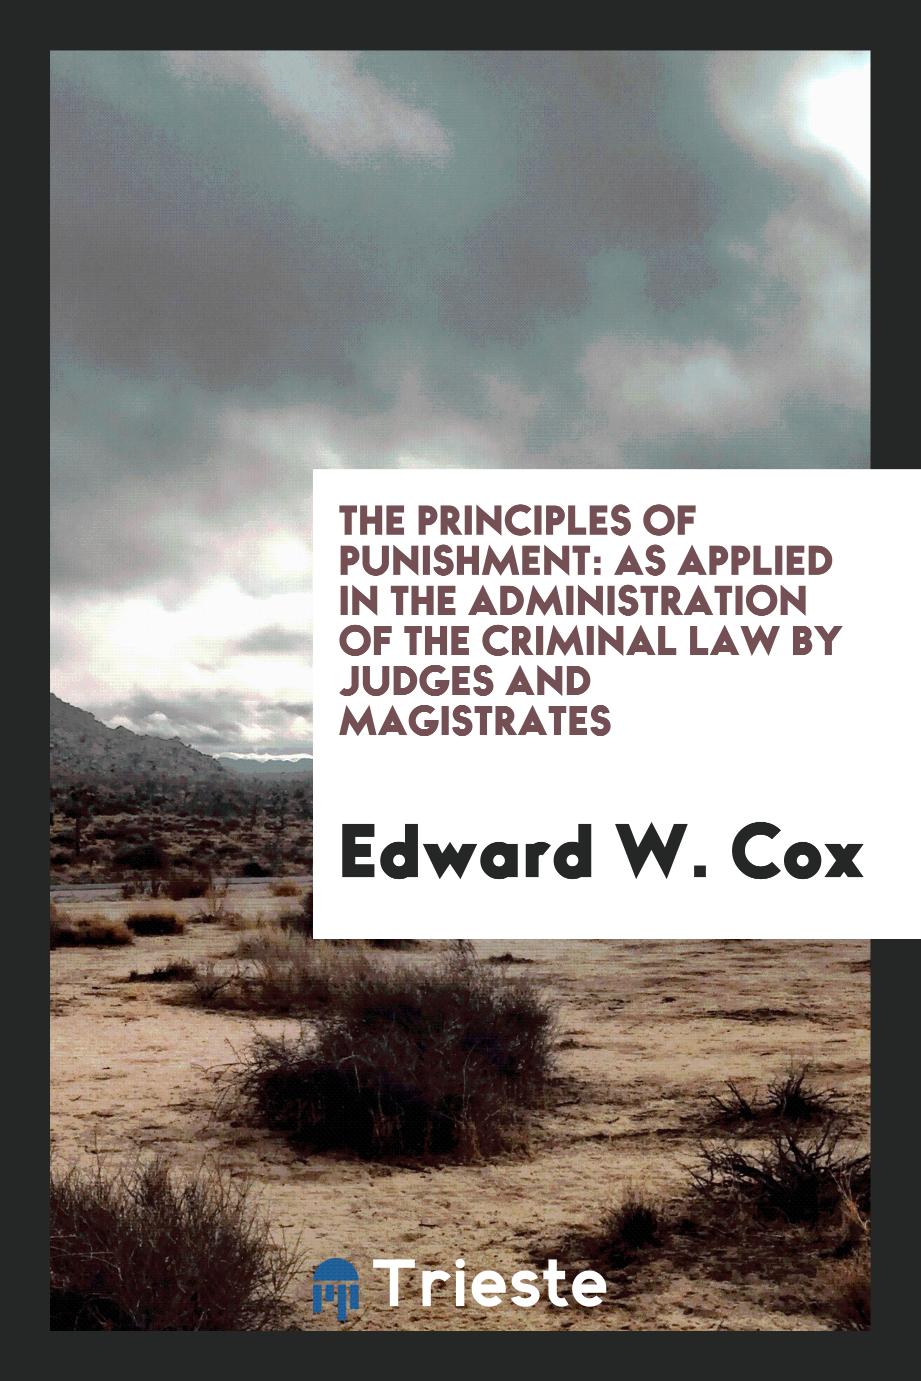 The Principles of Punishment: As Applied in the Administration of the Criminal Law by Judges and Magistrates